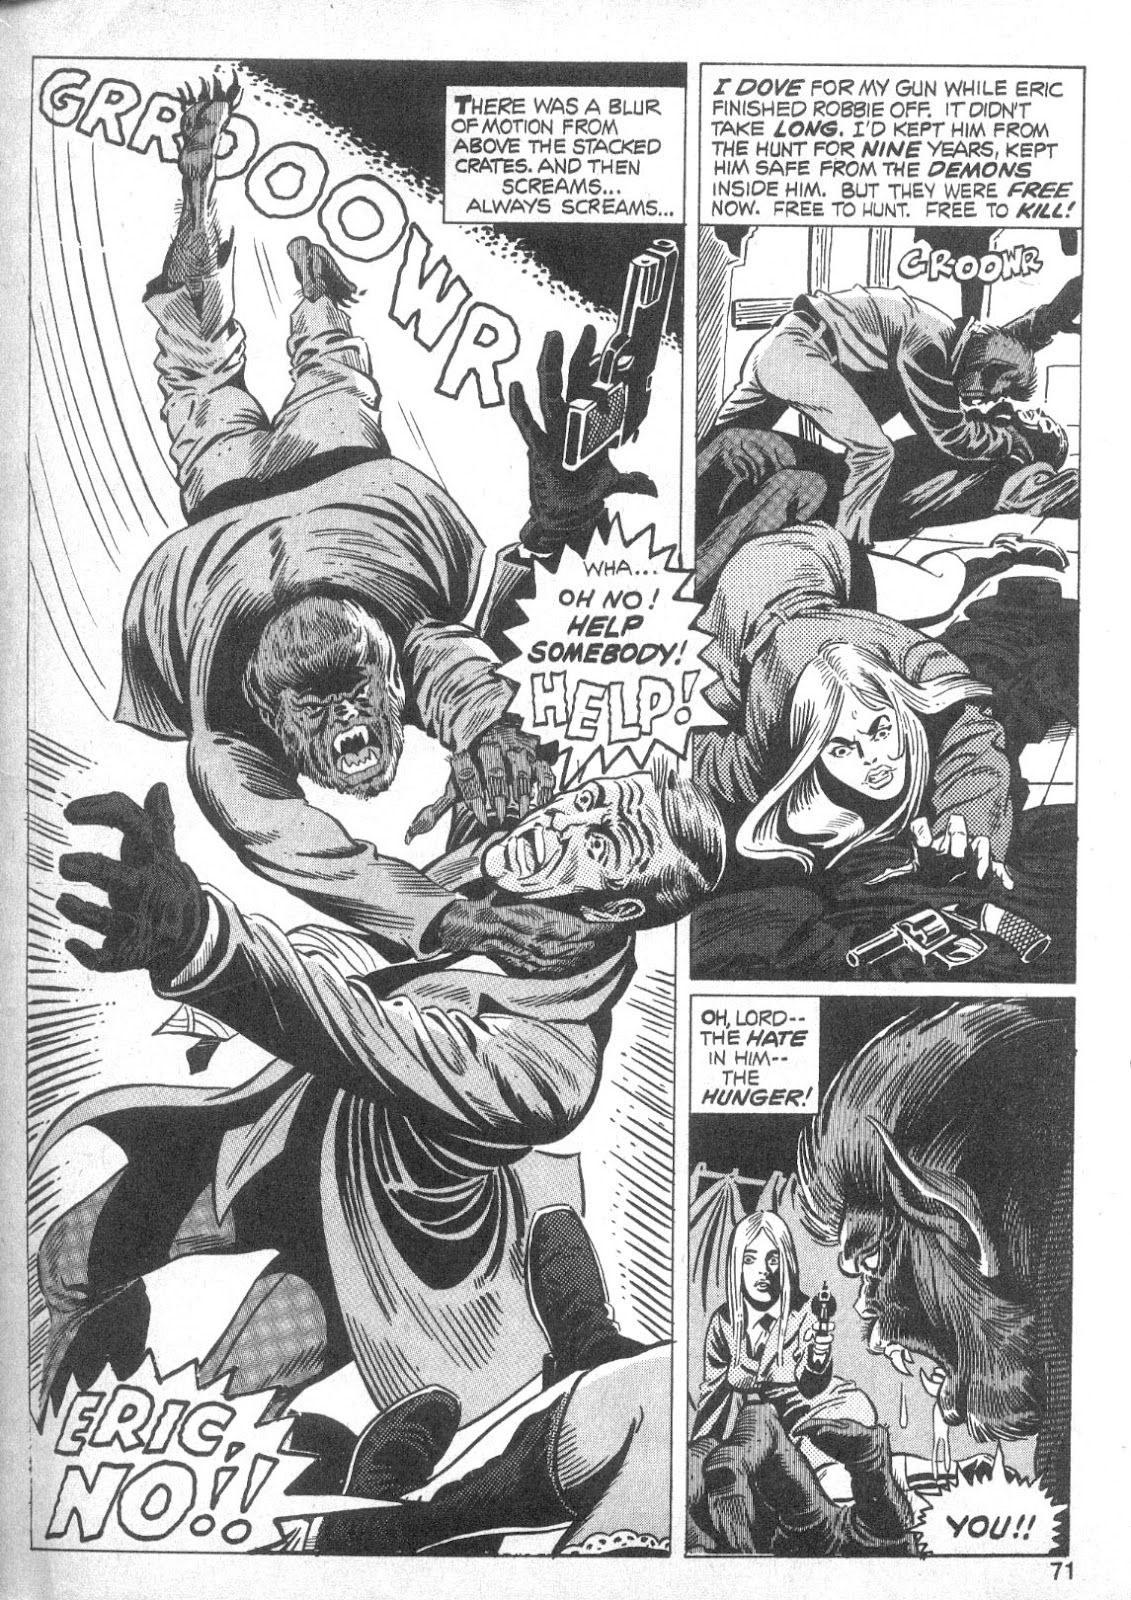 Monsters Unleashed (1973) issue 4 - Page 71